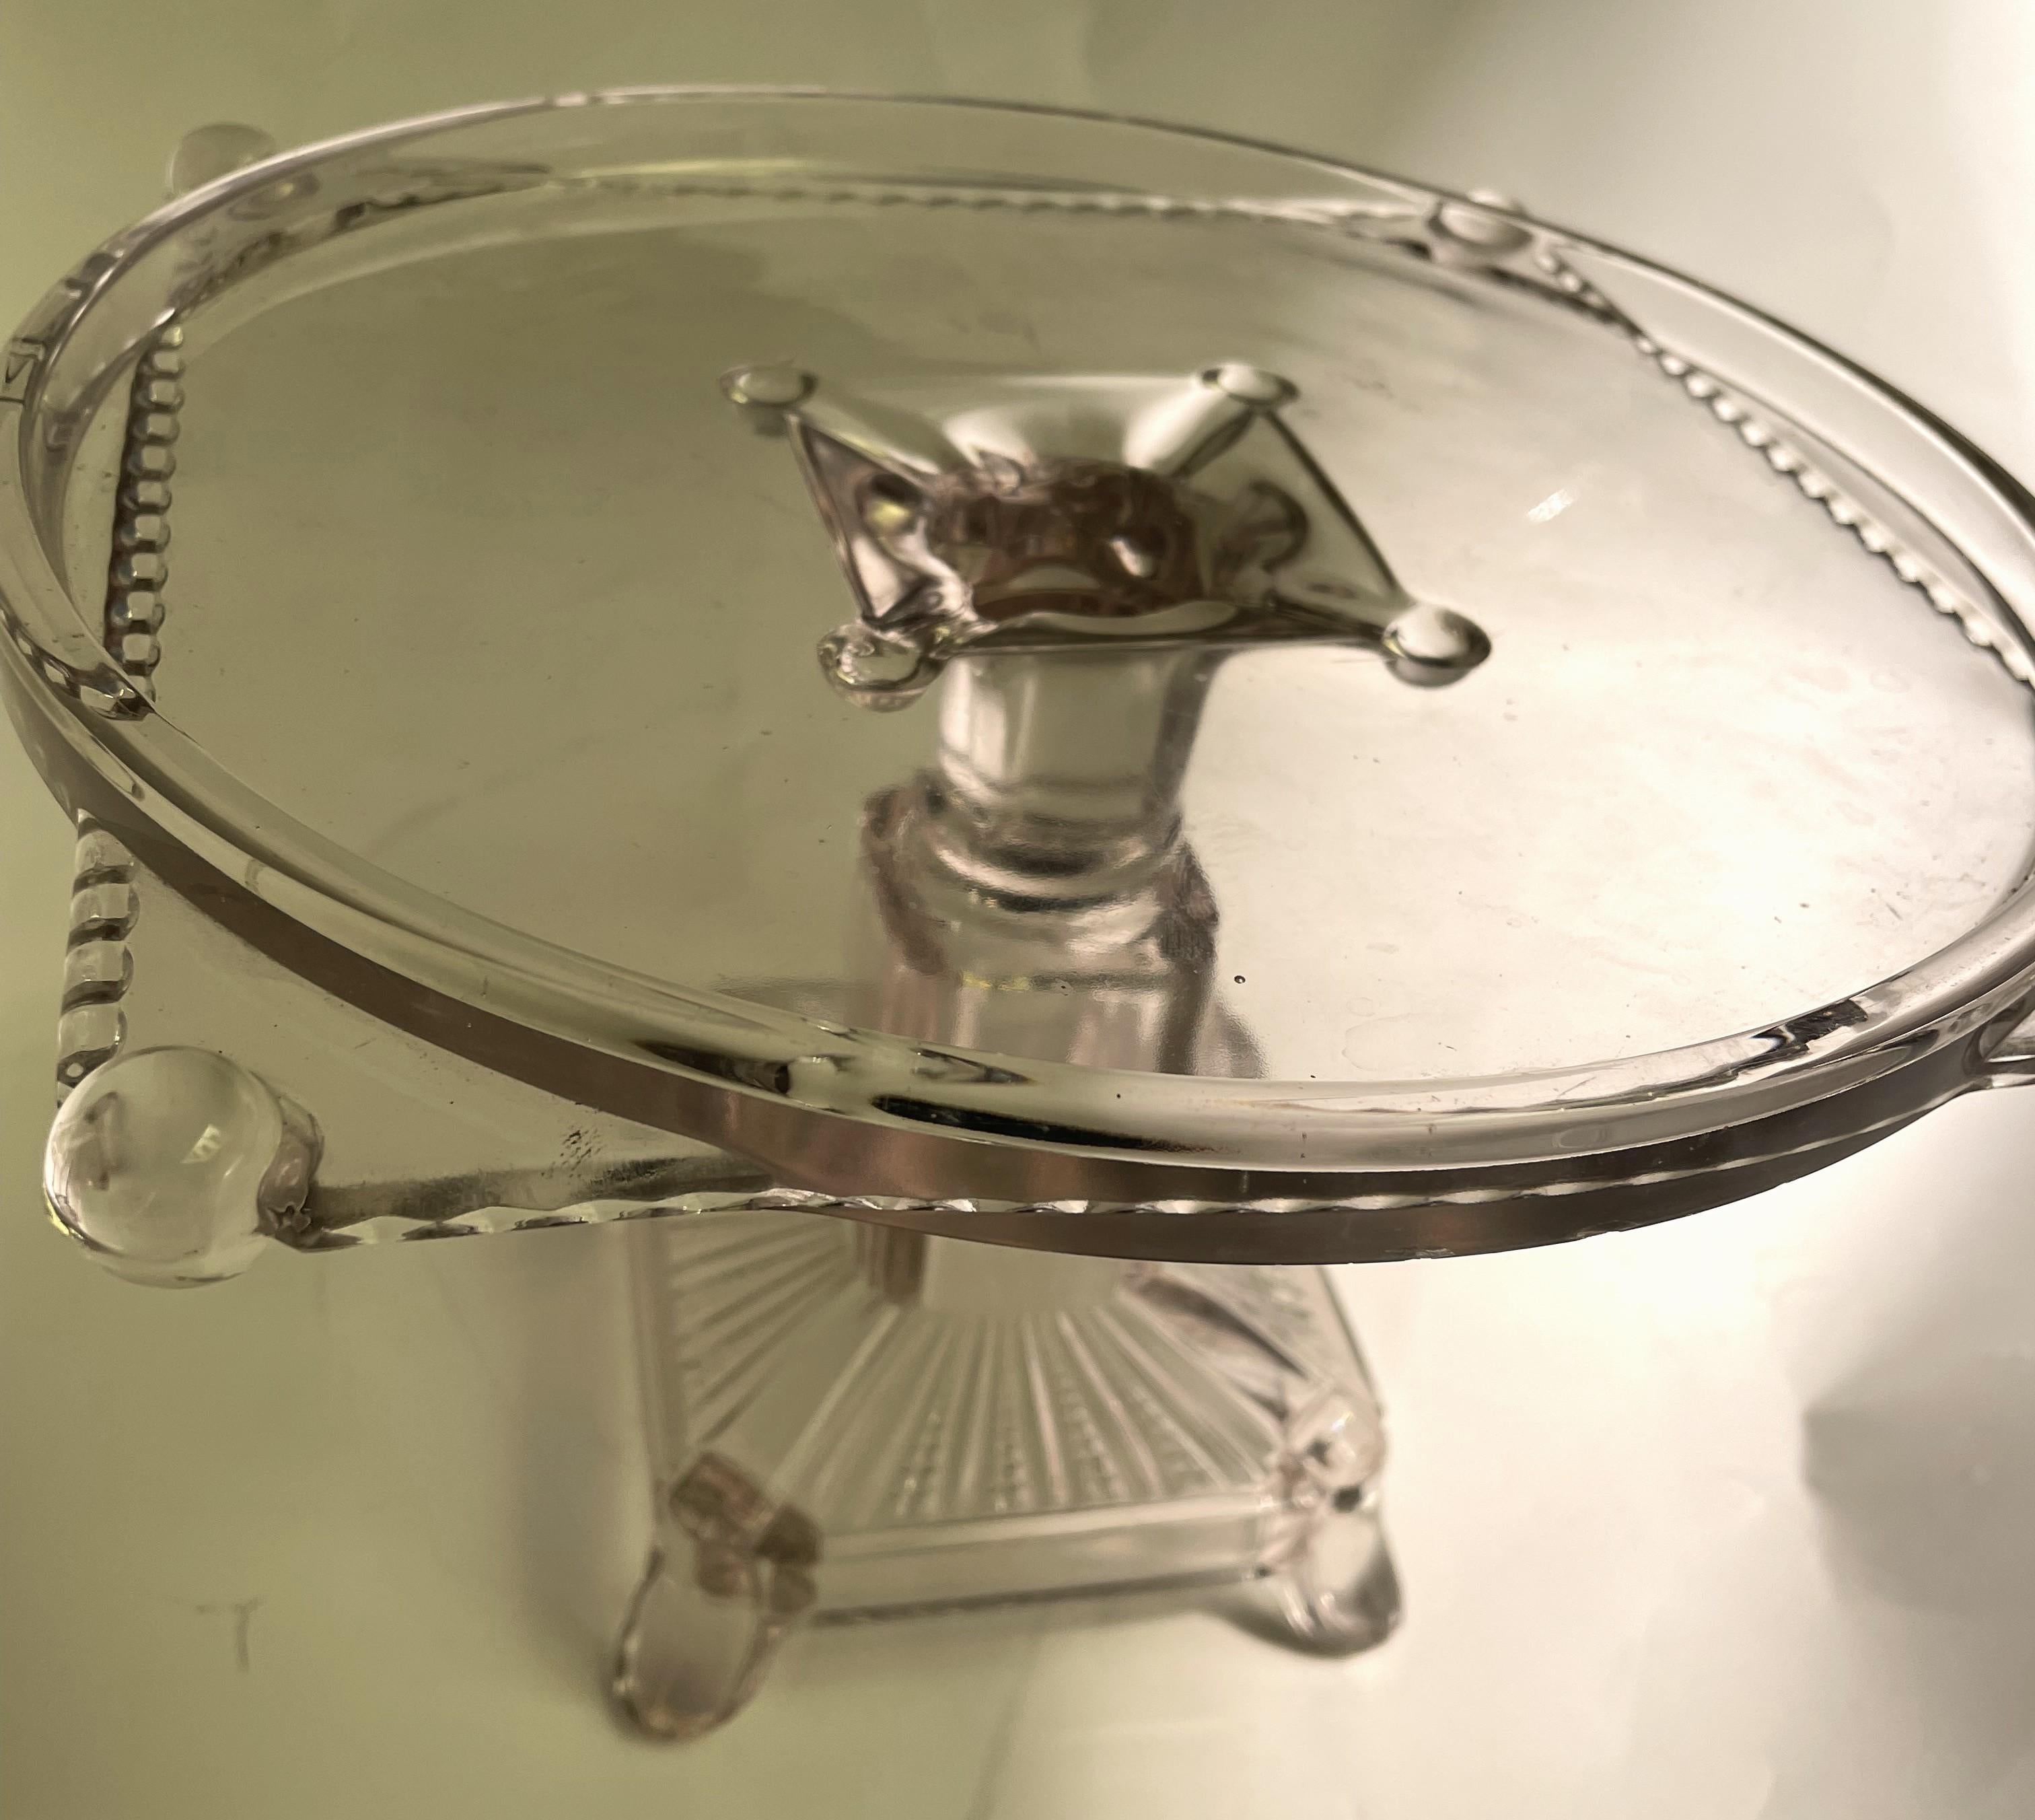 This is a fabulous antique clear glass cake stand with a wonderful pattern glass square base. The top has a round rim with four corners of a square poking out from below the rim. There is a nice design along the edge of the square a fun balls at the